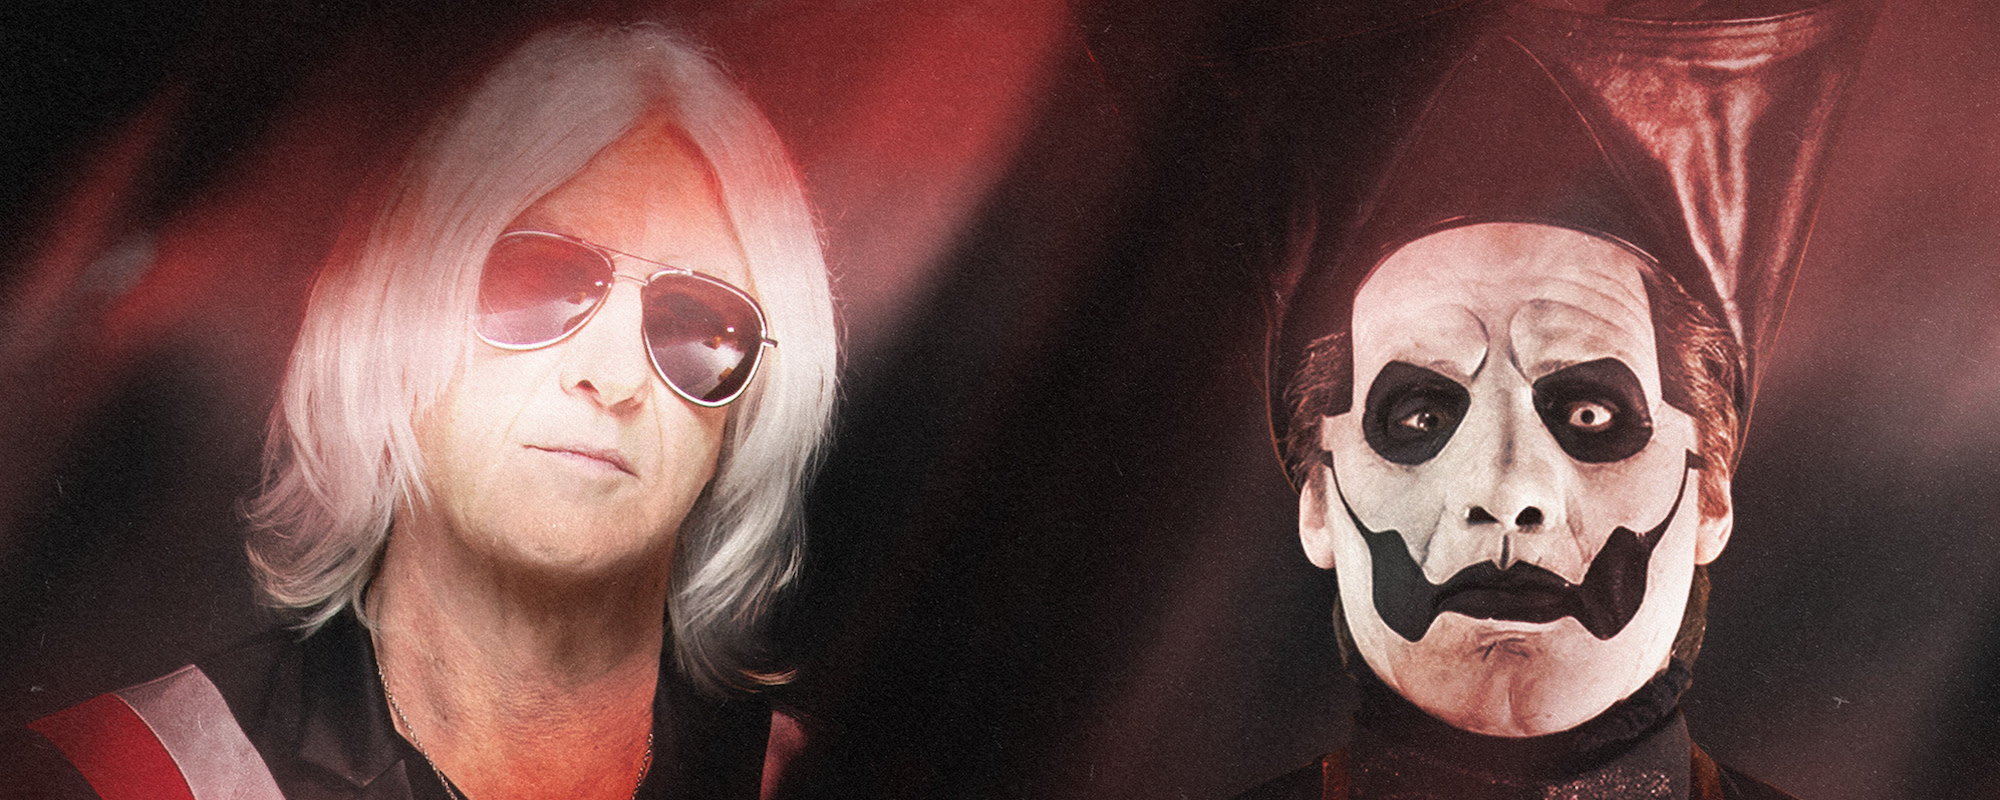 Def Leppard’s Joe Elliott Duets with Tobias Forge on Ghost Song “Spillways”